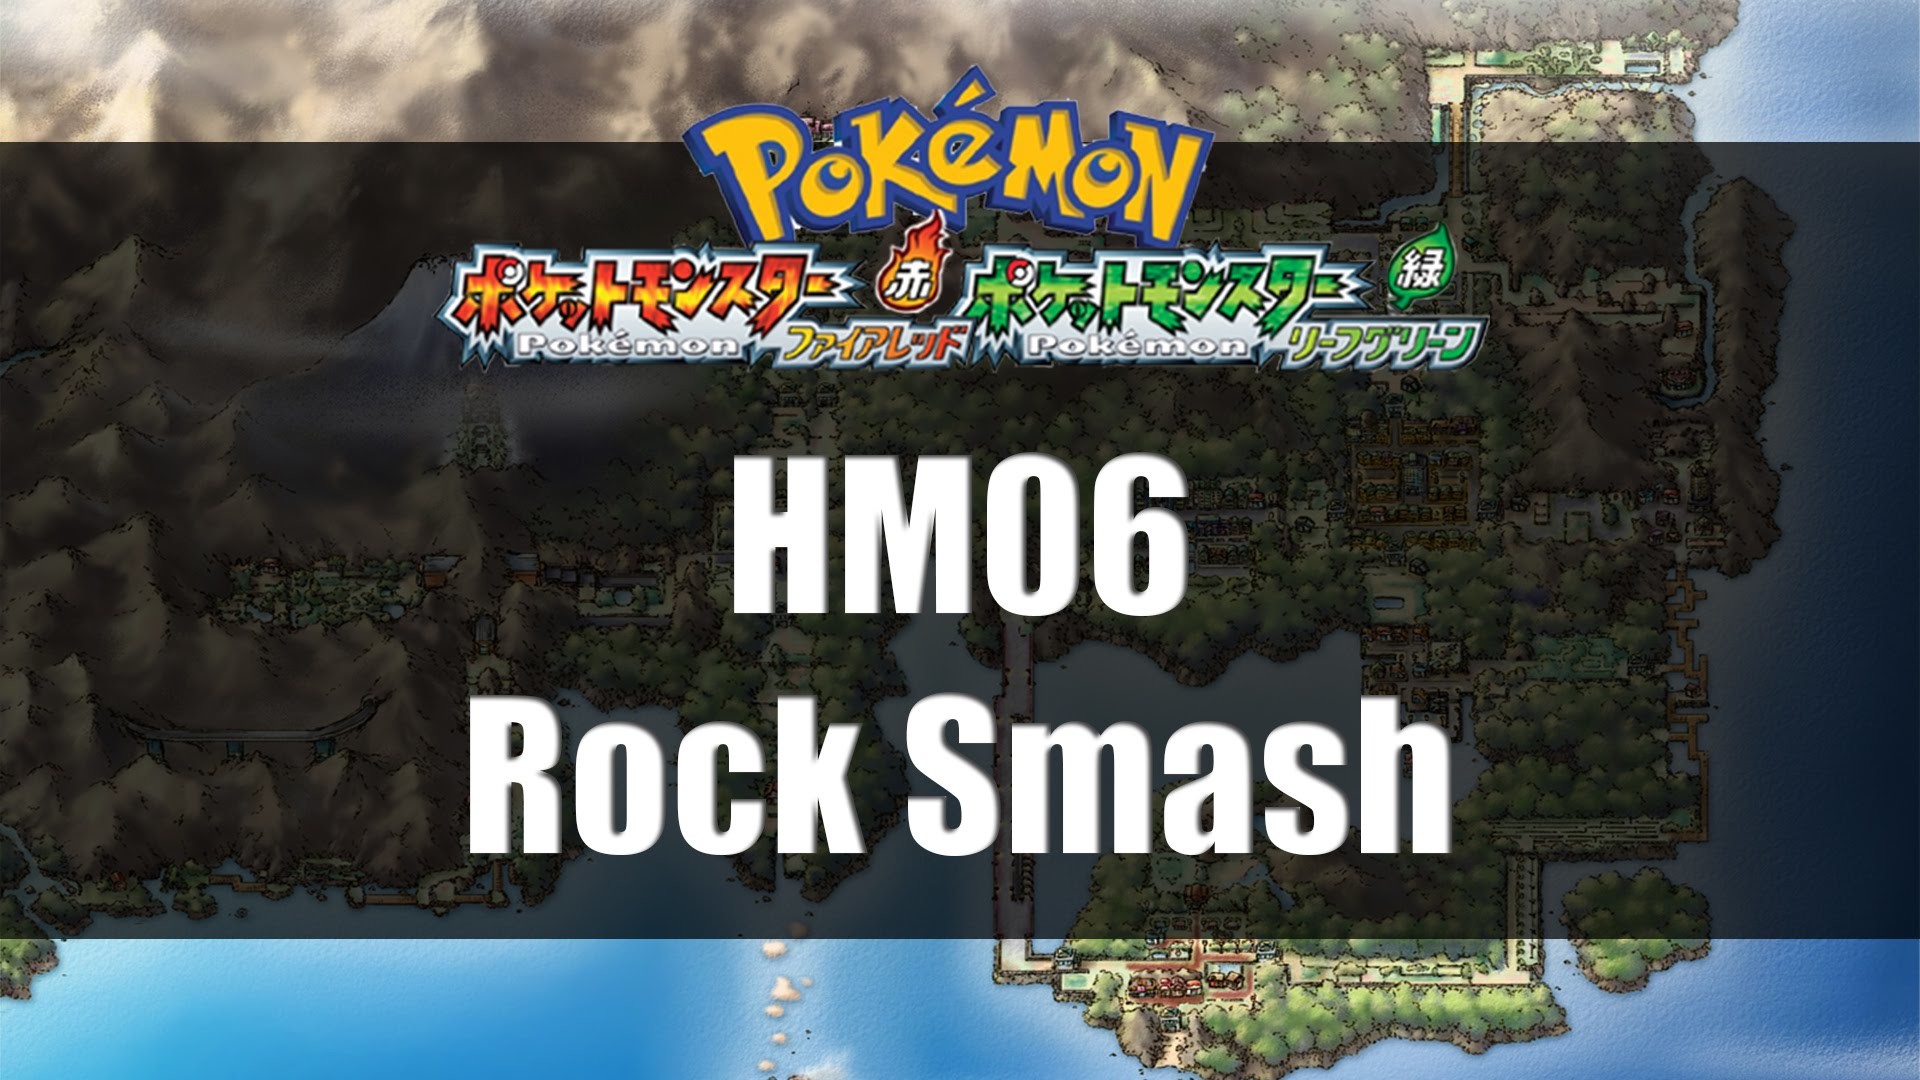 1920x1080 Pokemon Fire Red & Leaf Green | Where to find HM06 Rock Smash - YouTube